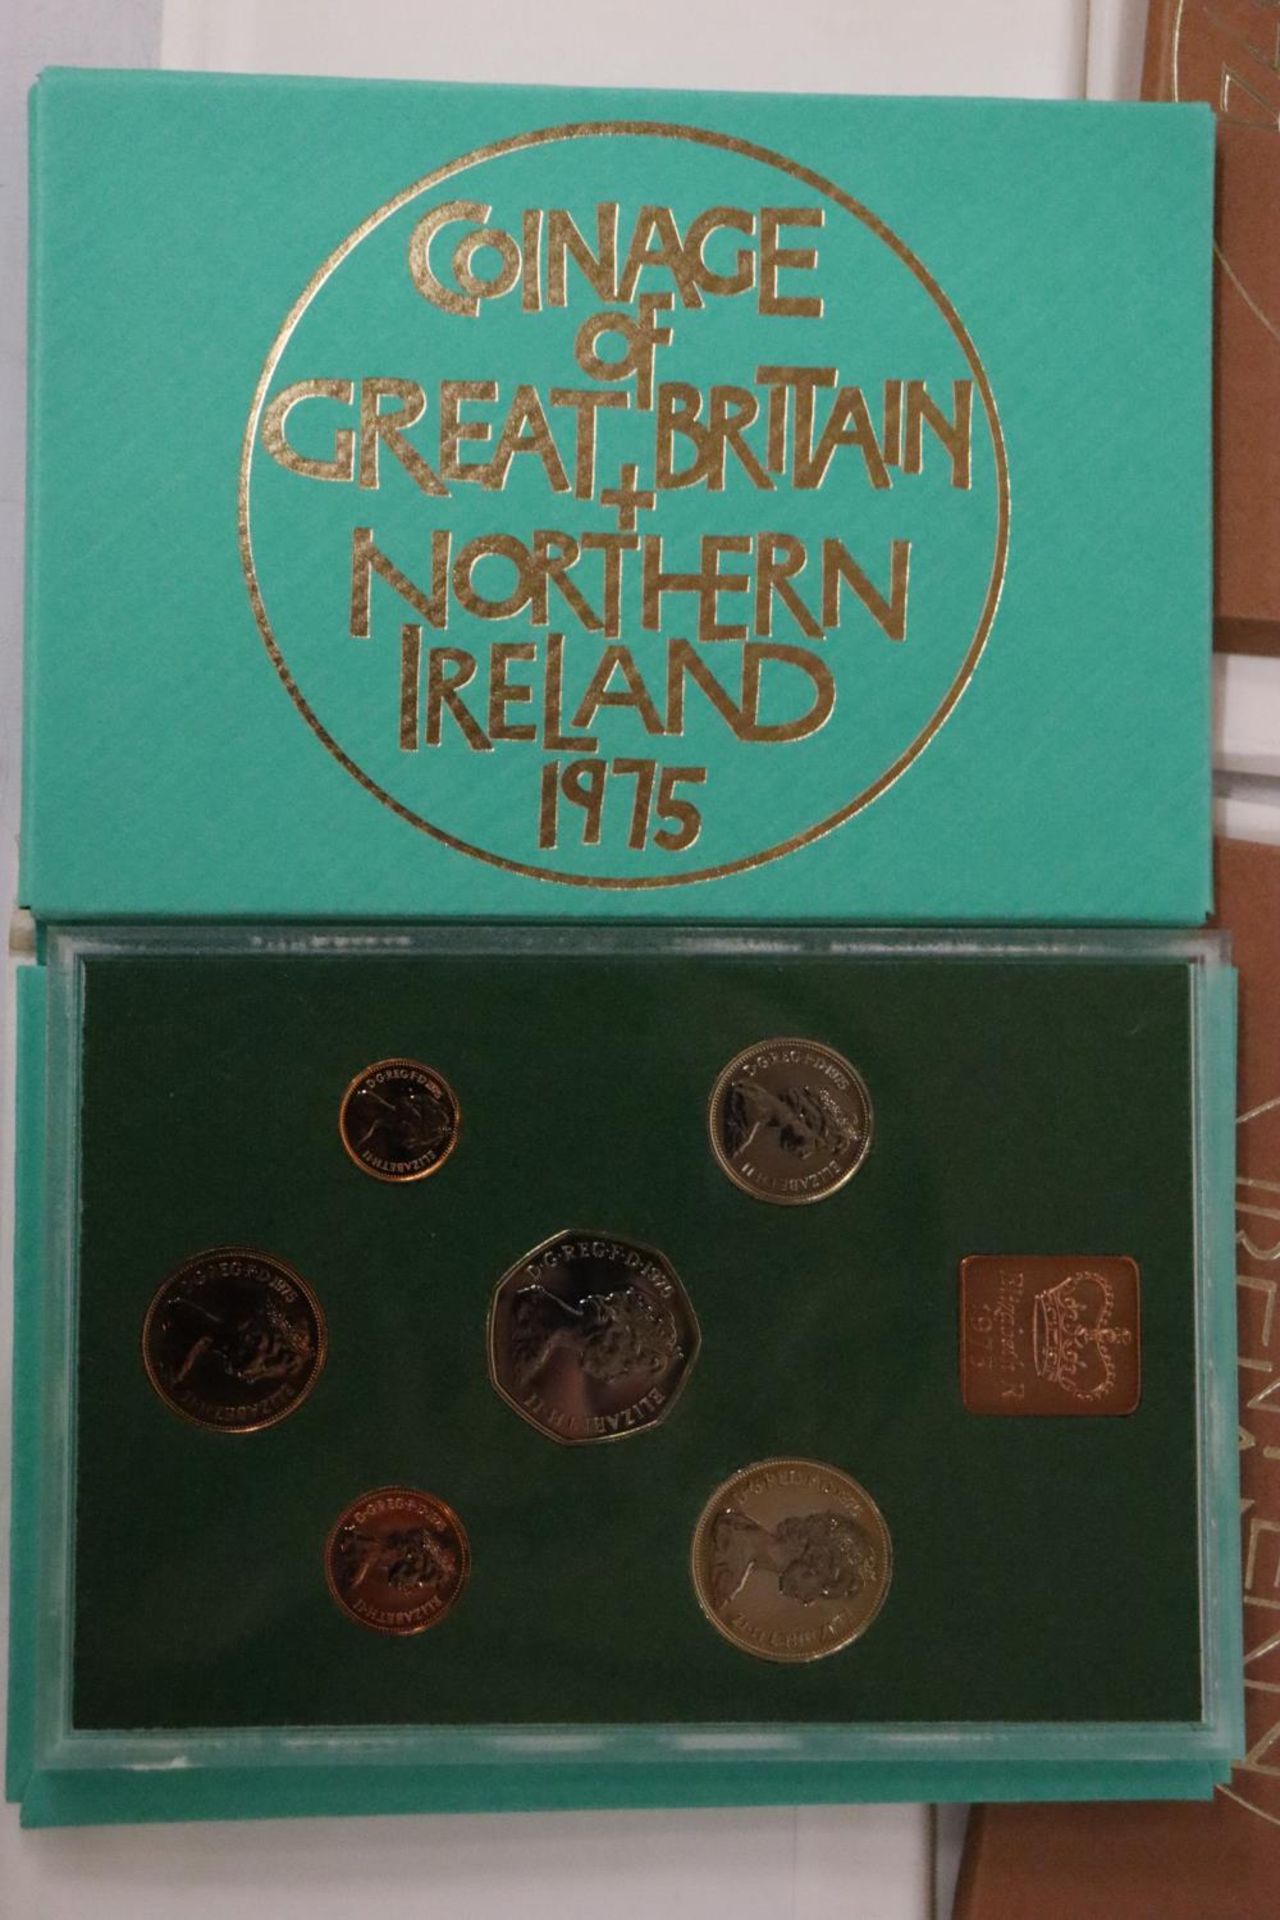 UK & NI , 2 X 1972, 2 X’73, 2 X ’74 AND 2 X ’75 YEAR PACKS OF COINS CONTAINED IN ENVELOPE - Image 2 of 5